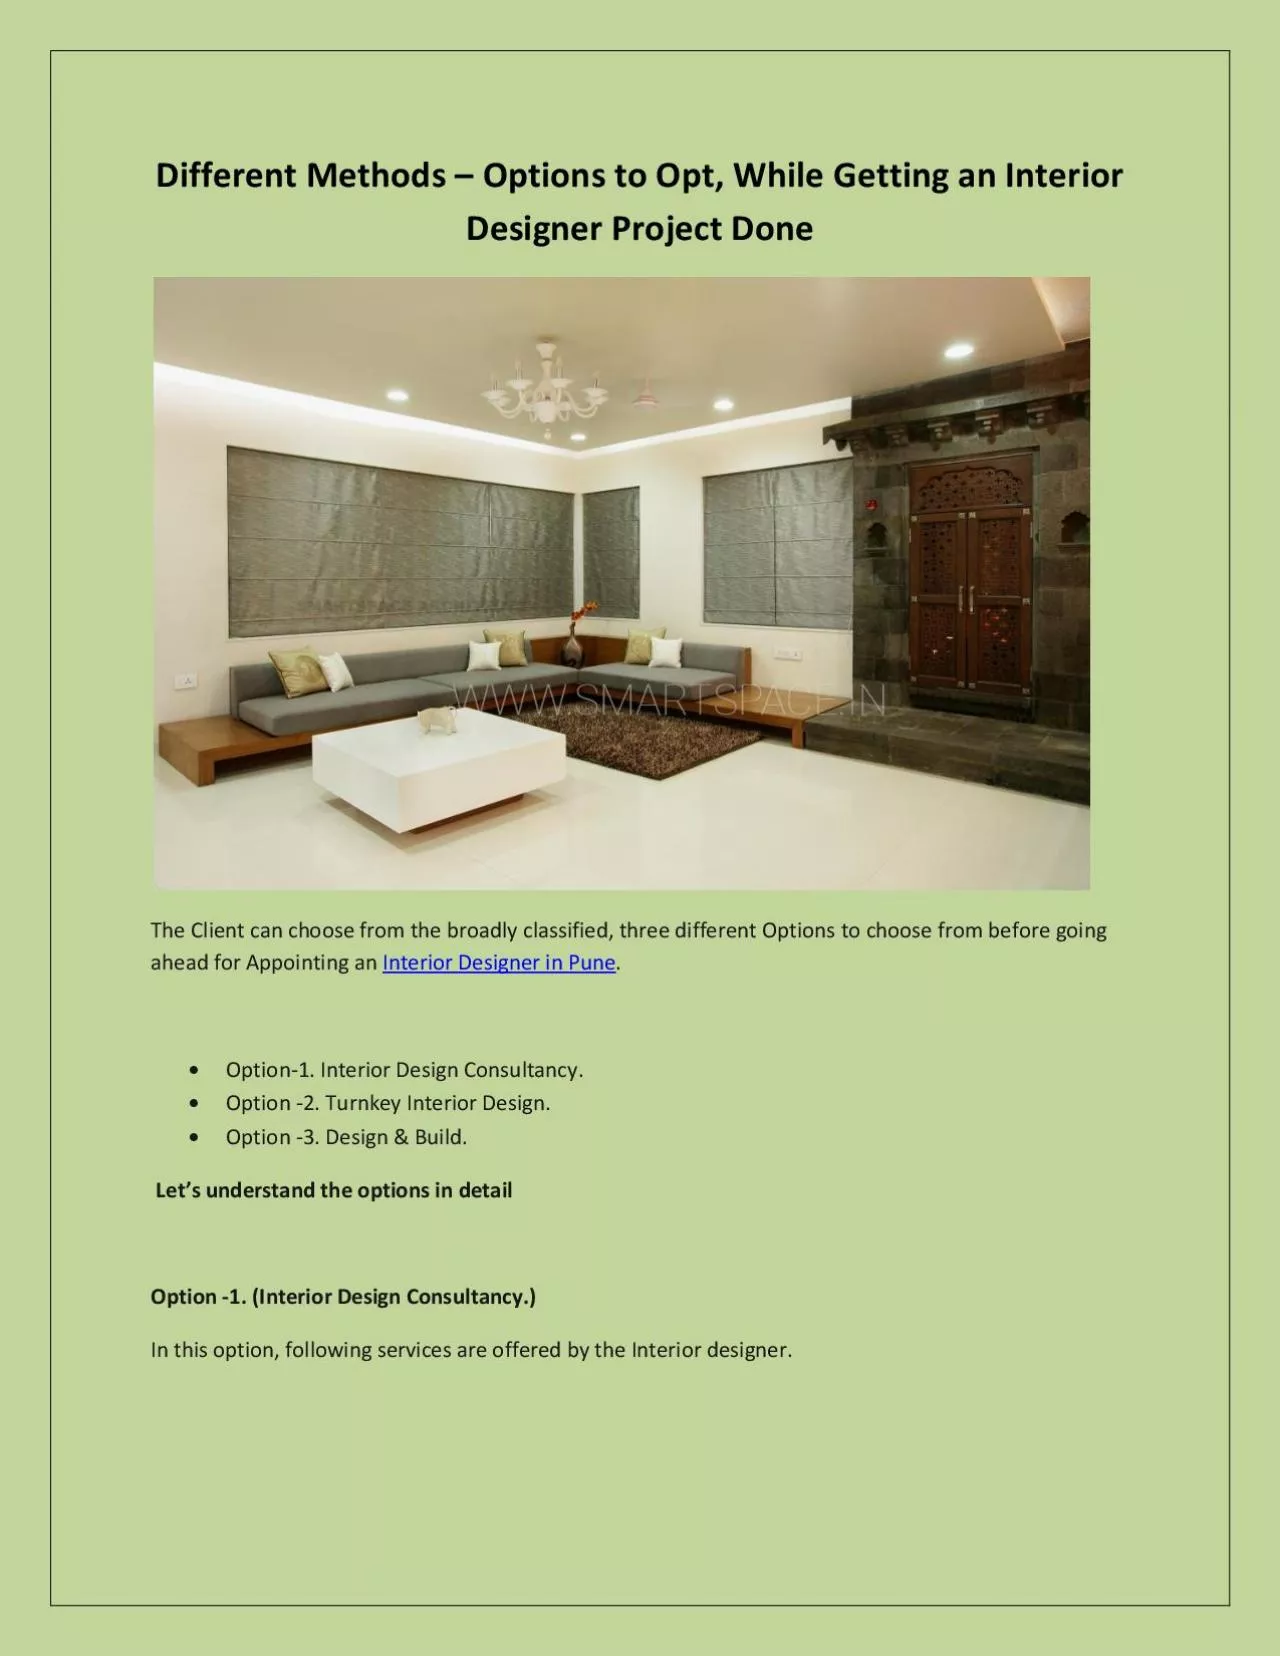 Different Methods – Options to Opt, While Getting an Interior Designer Project Done